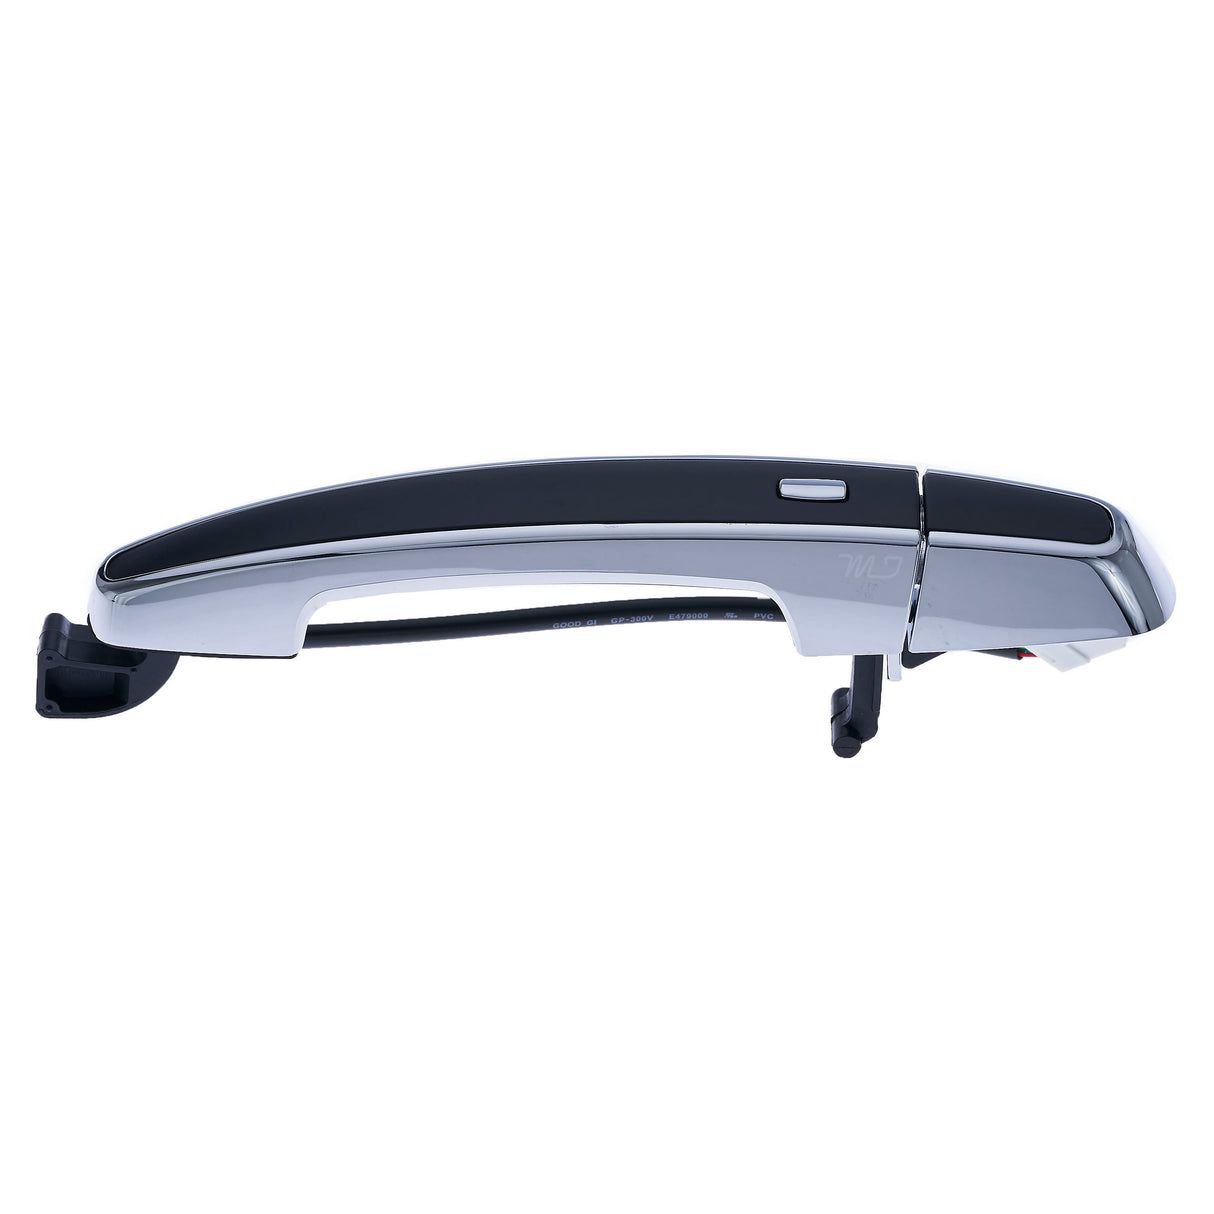 Chevrolet Malibu (2016-Current) Black/Chrome Replacement Exterior Door Handle Front Right Side w/o Keyhole